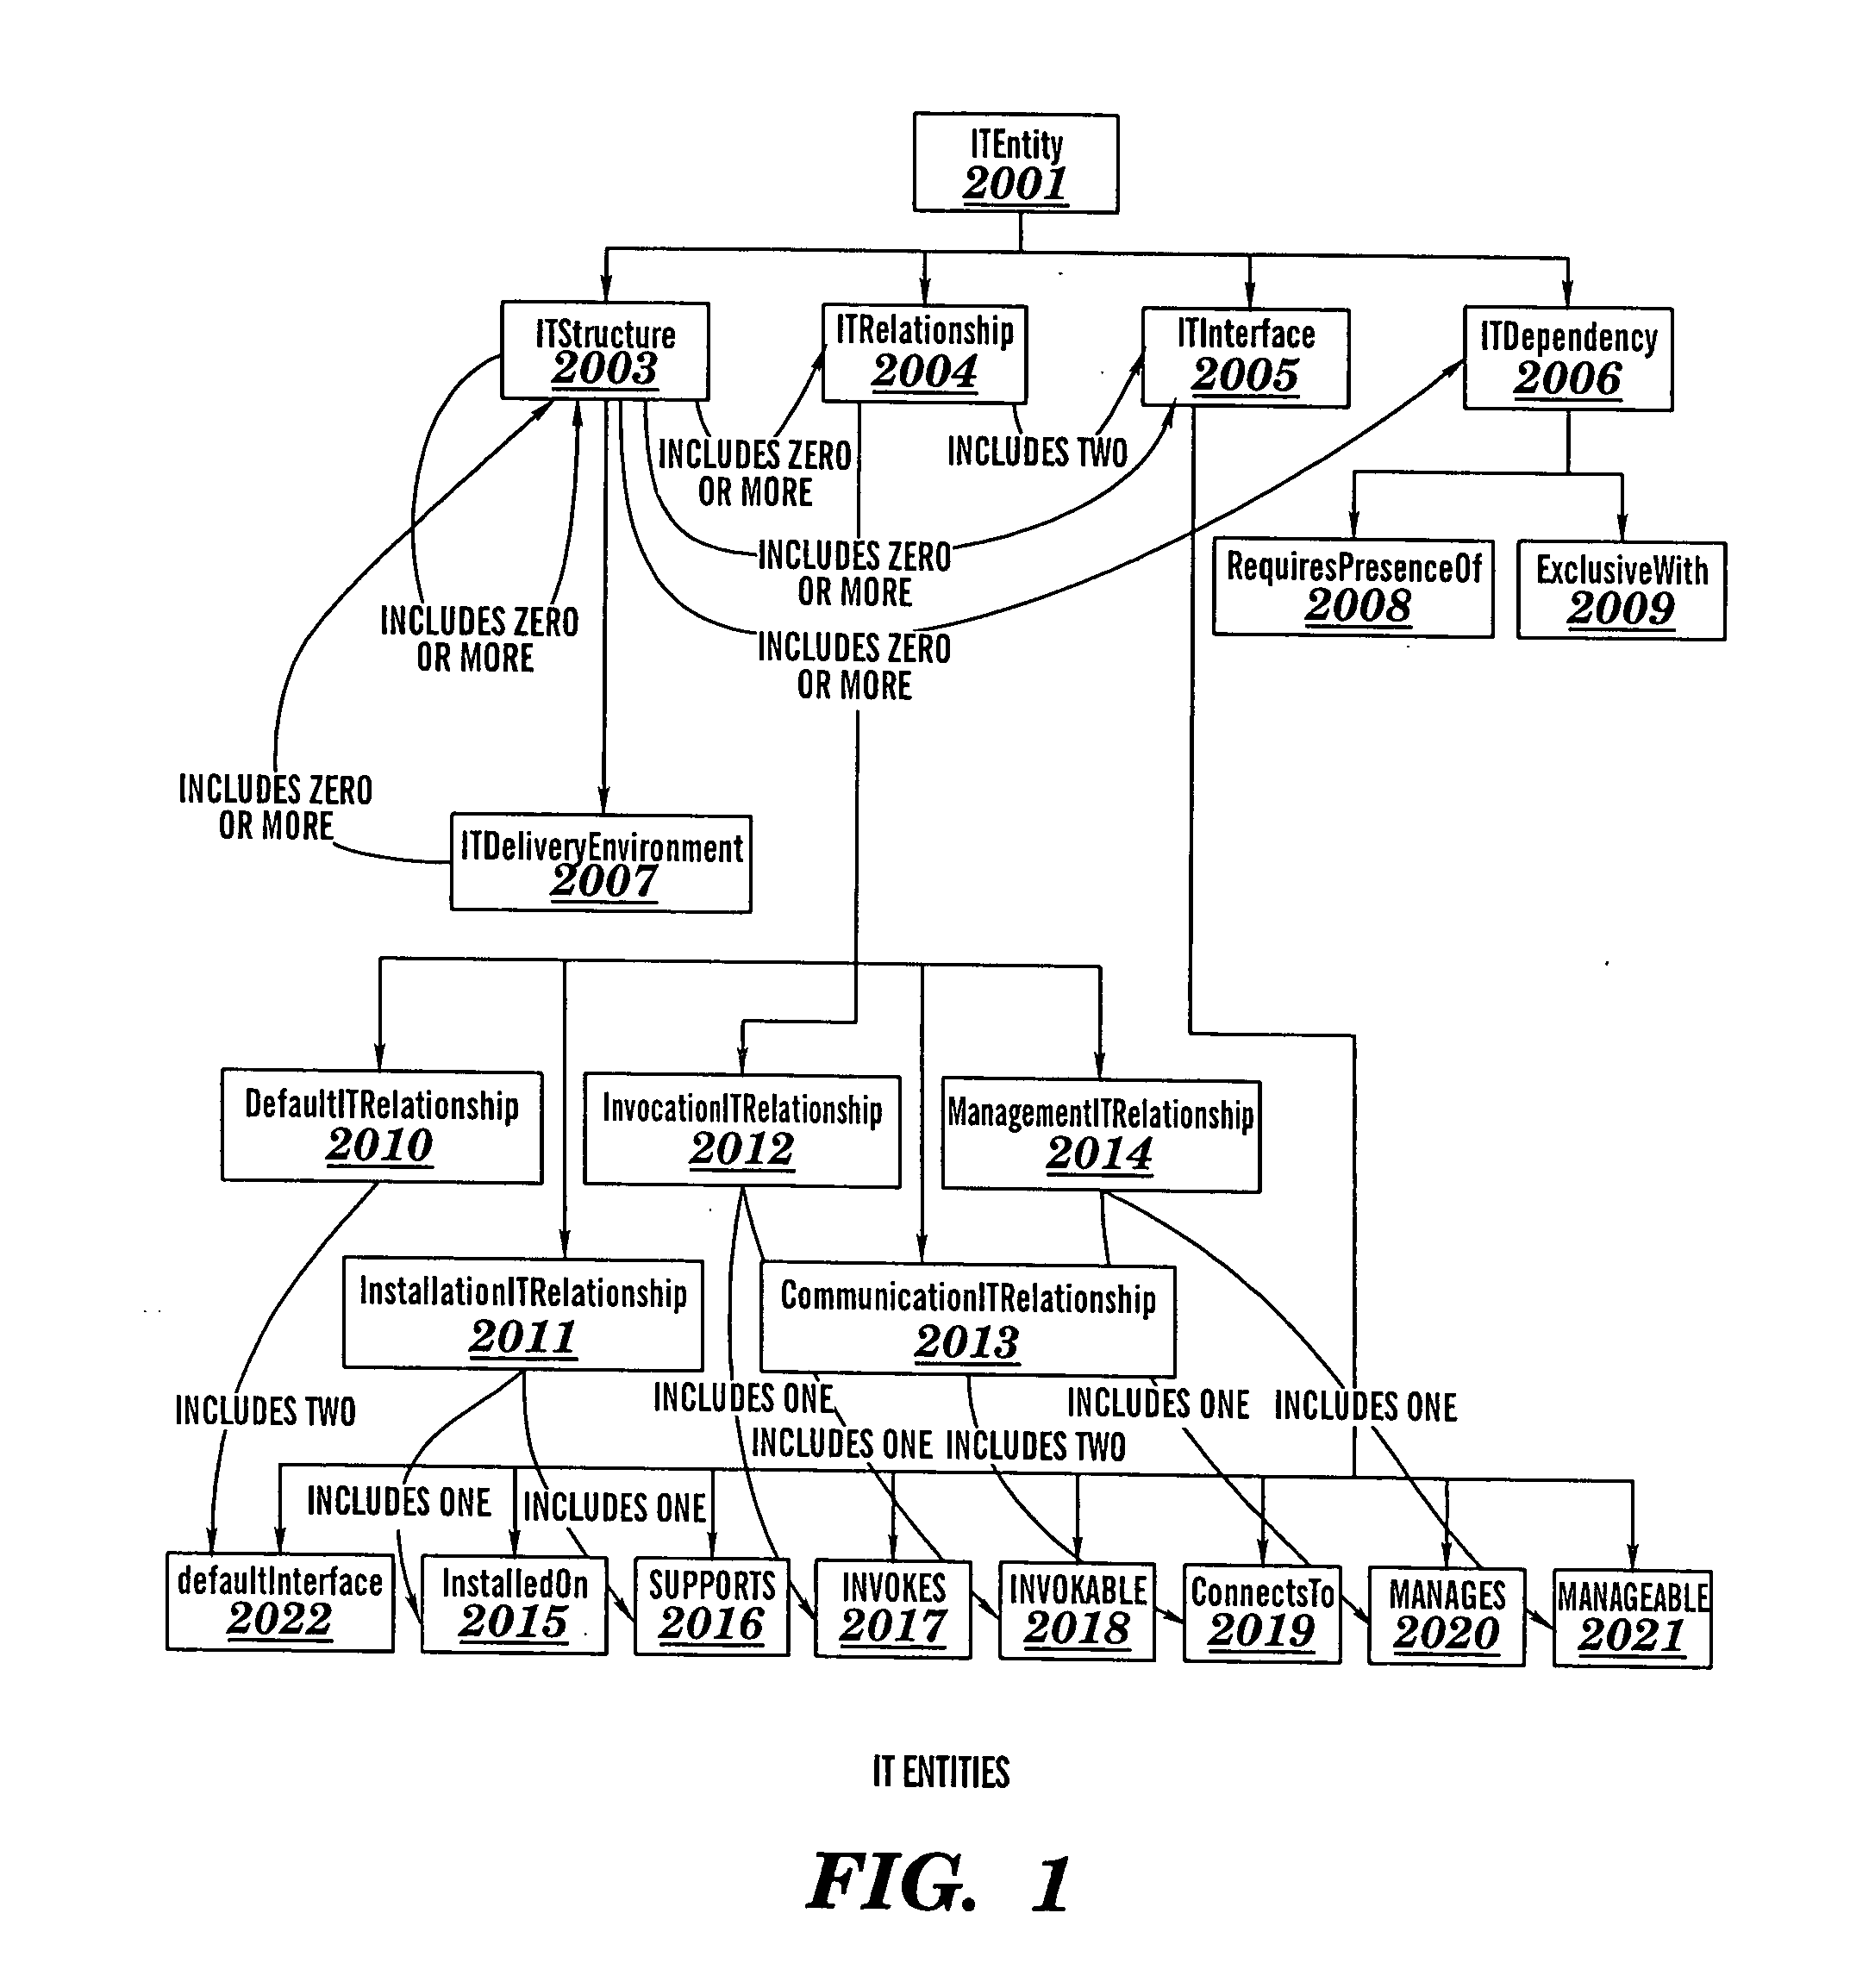 Automated generation of configuration elements of an information technology system